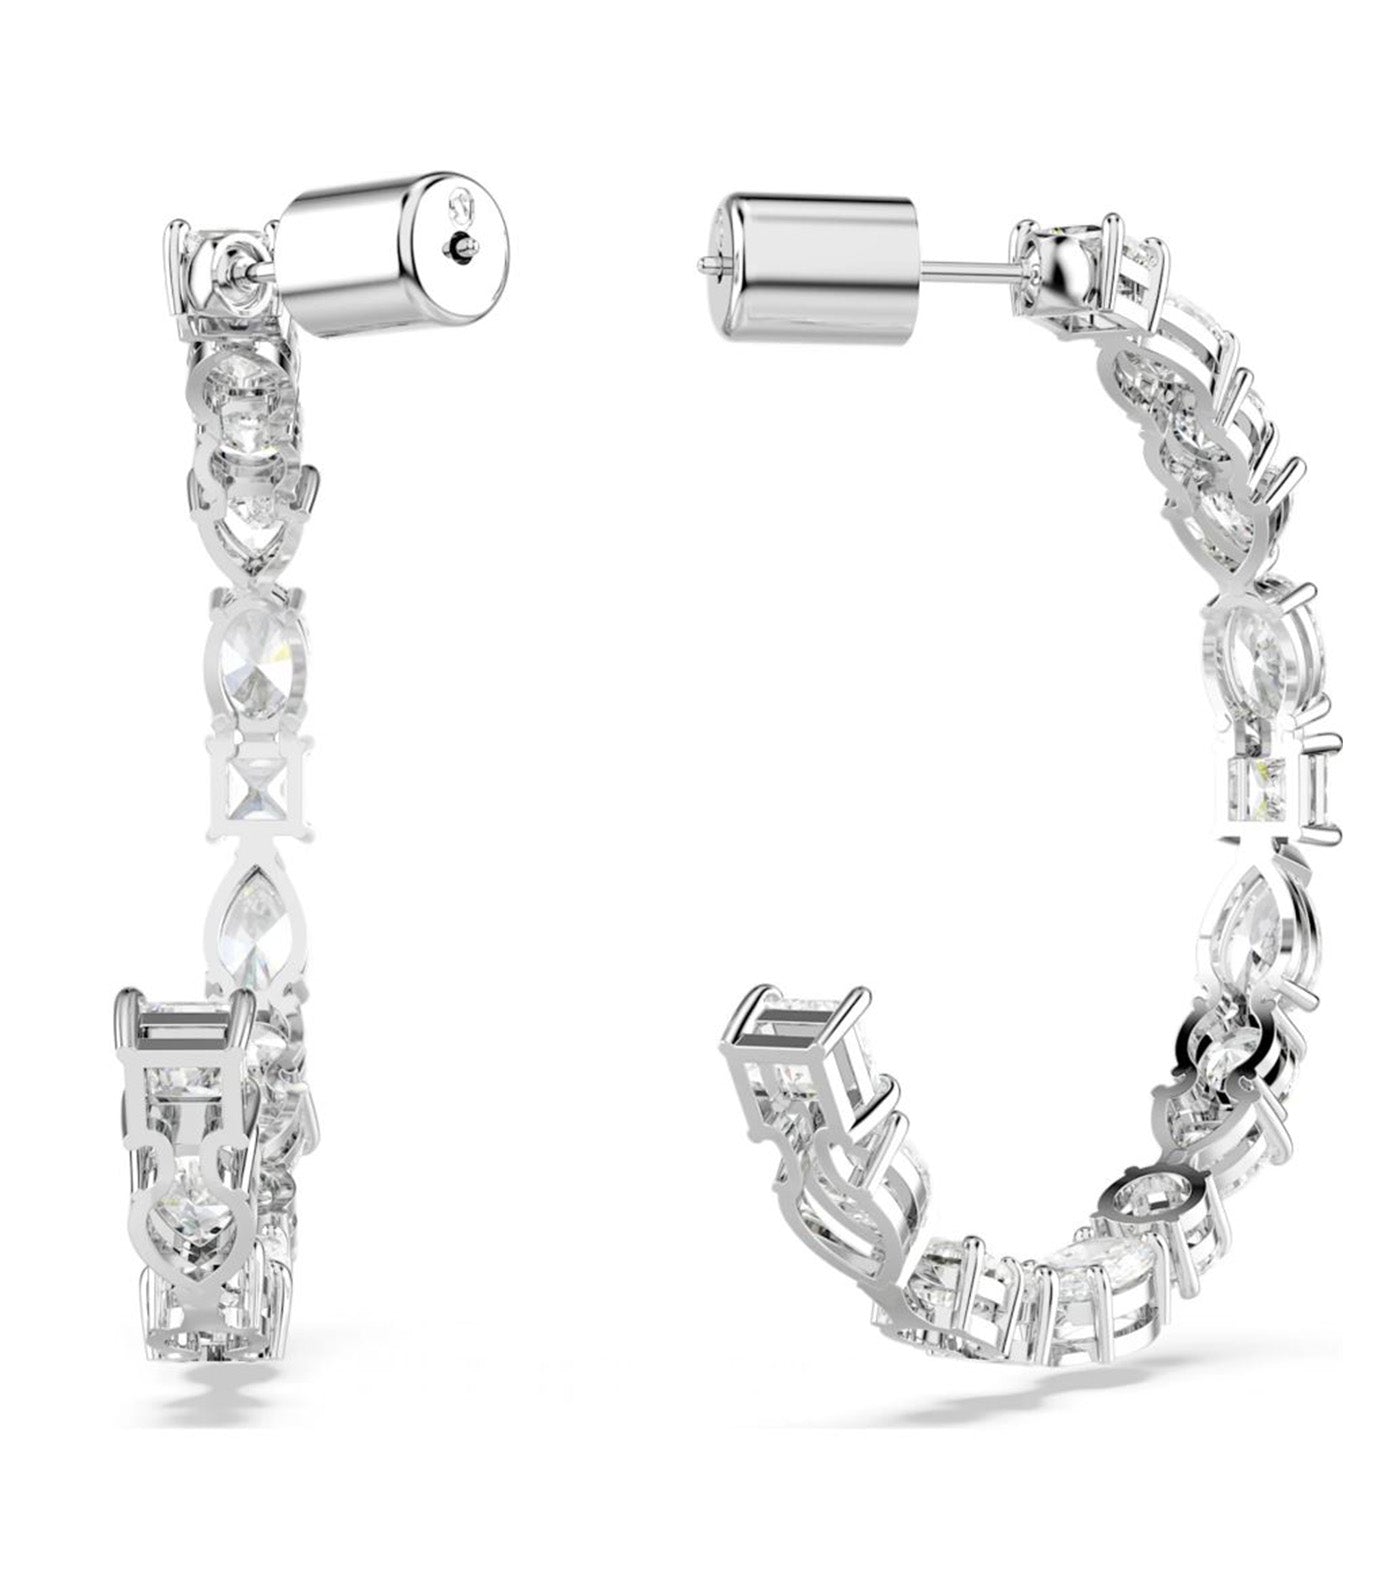 Mesmera Hoop Earrings, Mixed Cuts, White, Rhodium-Plated Silver